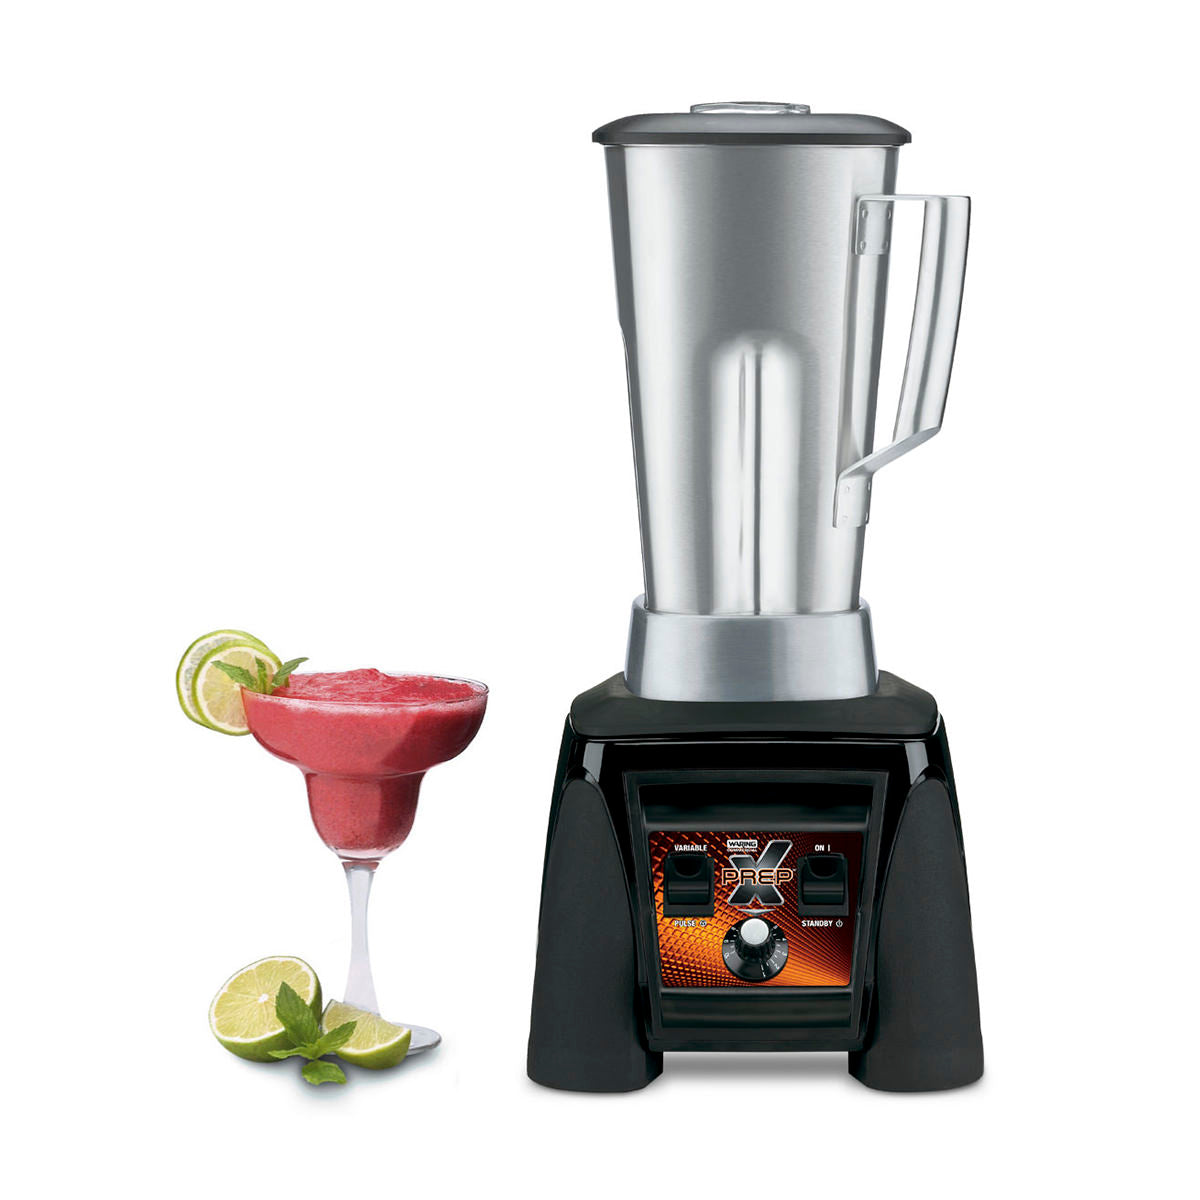 MX1200XTS "XPREP" Heavy-Duty Variable Speed Blender with 64 oz Stainless Steel Jar by Waring Commercial